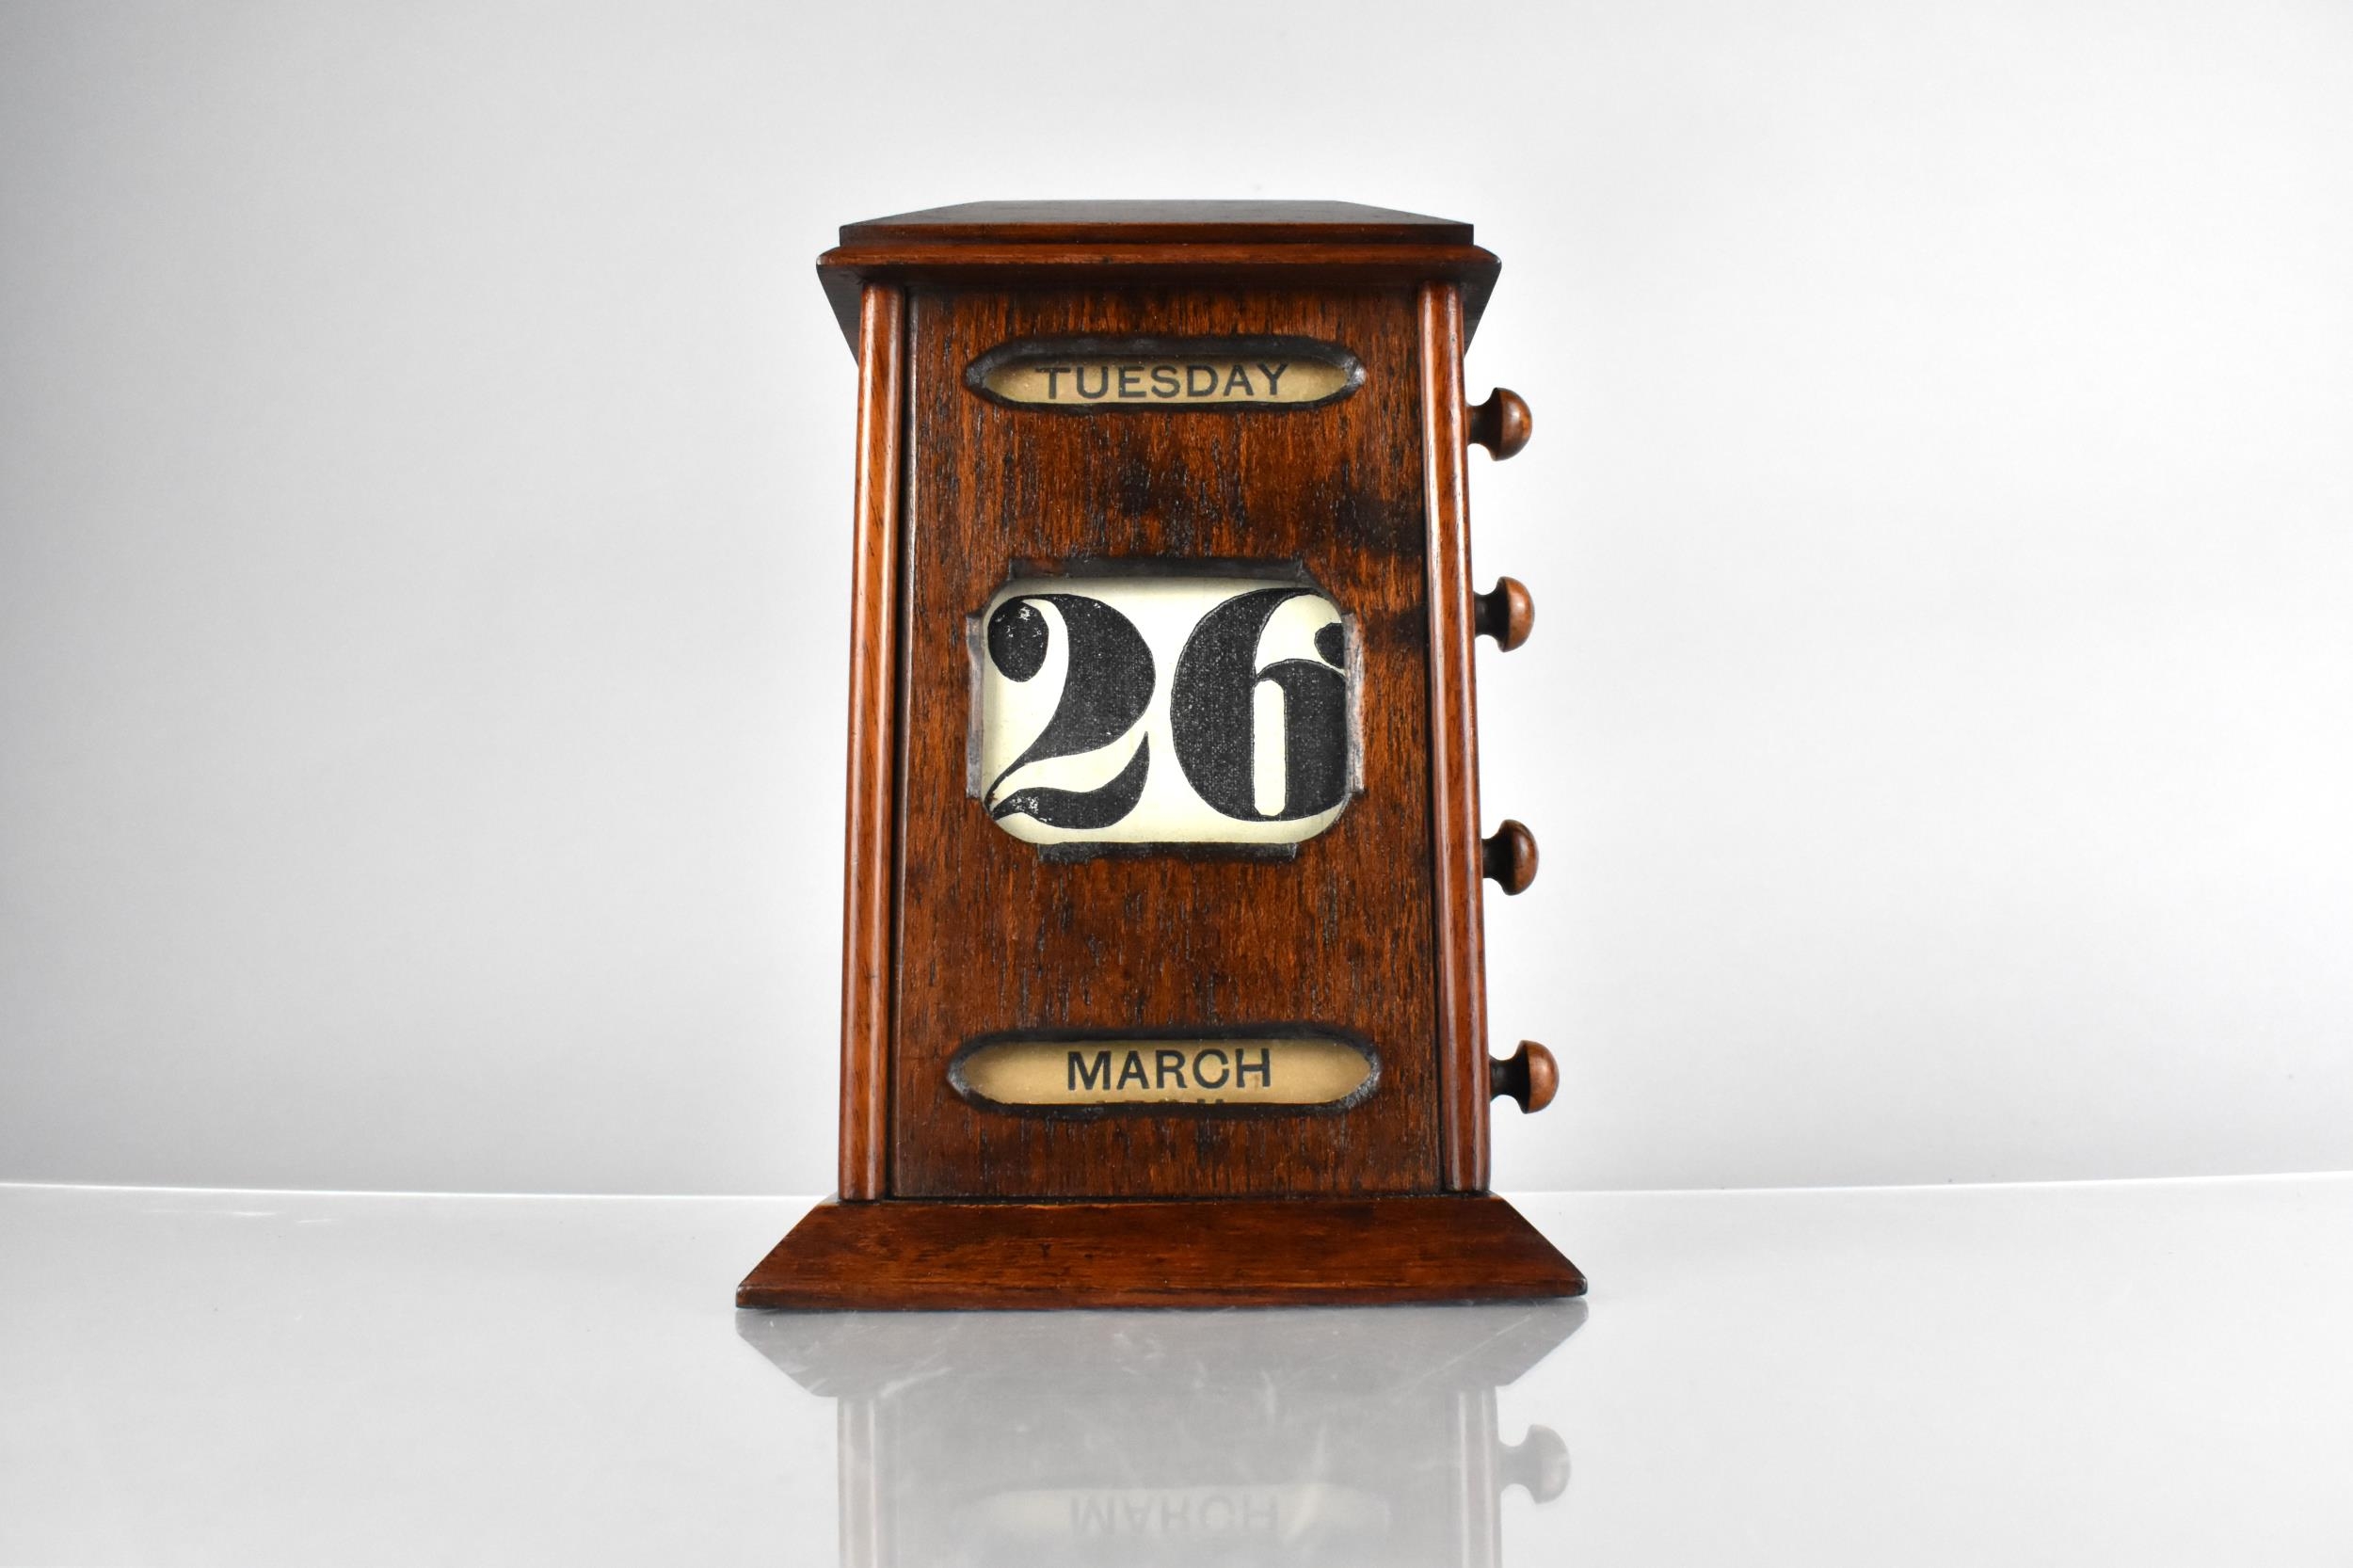 An Edwardian Oak Desktop Perpetual Calendar with Day, Date and Month, 21cm High - Image 3 of 3